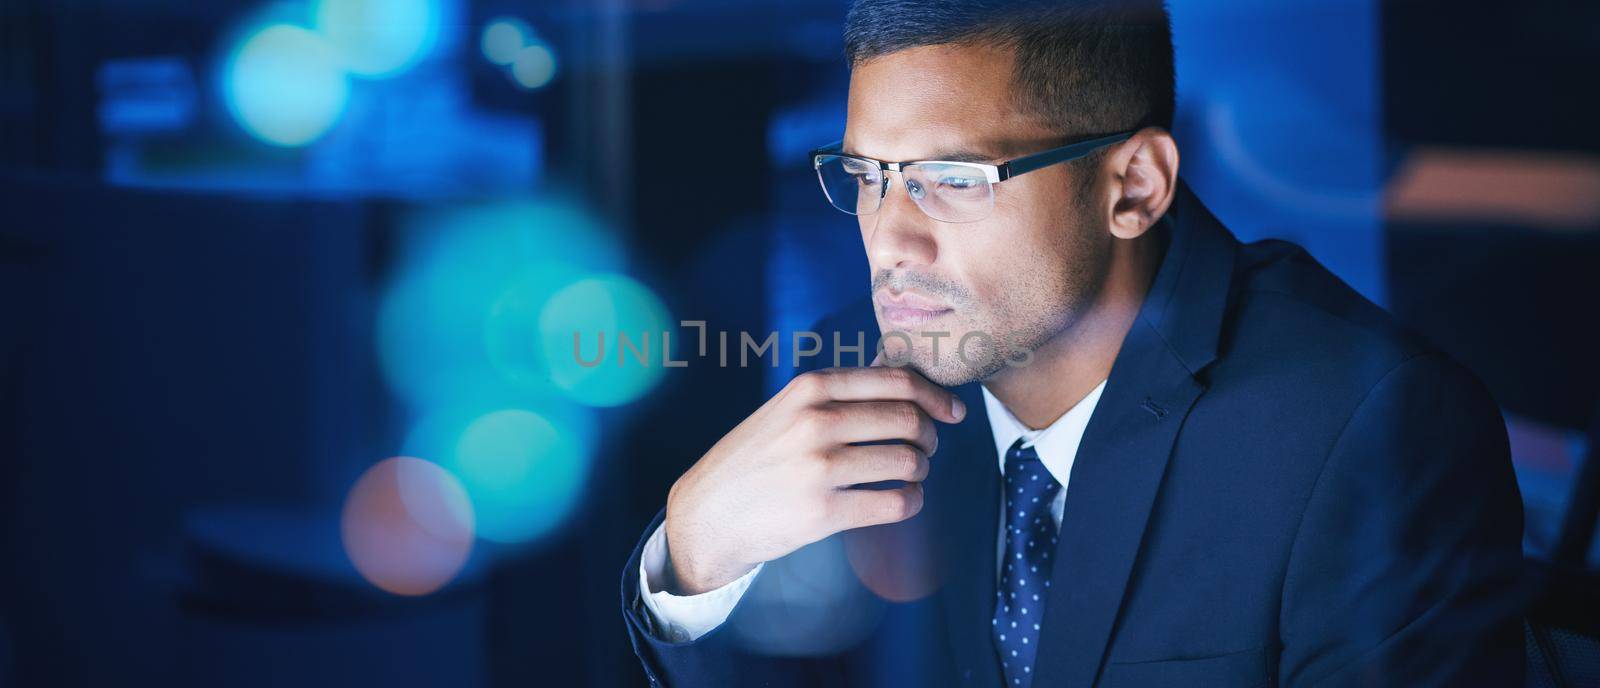 Businessman working, thinking and planning at night in a corporate company office. Networking for global communication or an international deal across time zones while trading with data and analytics.